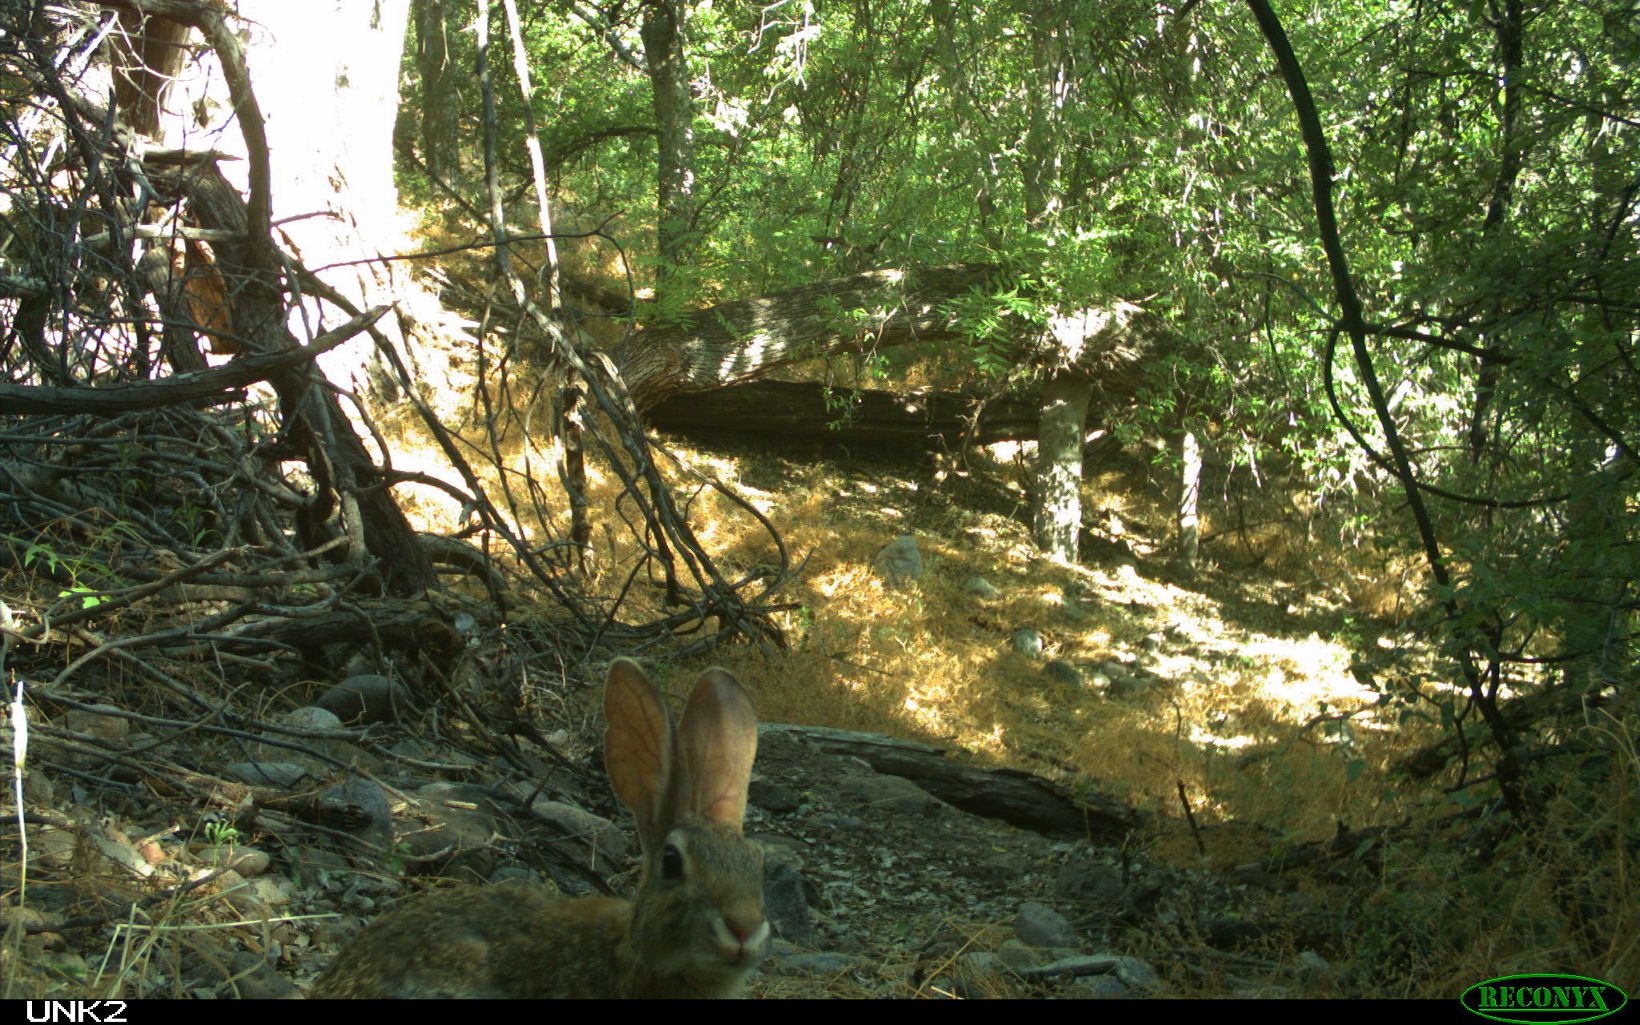 Desert cottontail on the trail camera.